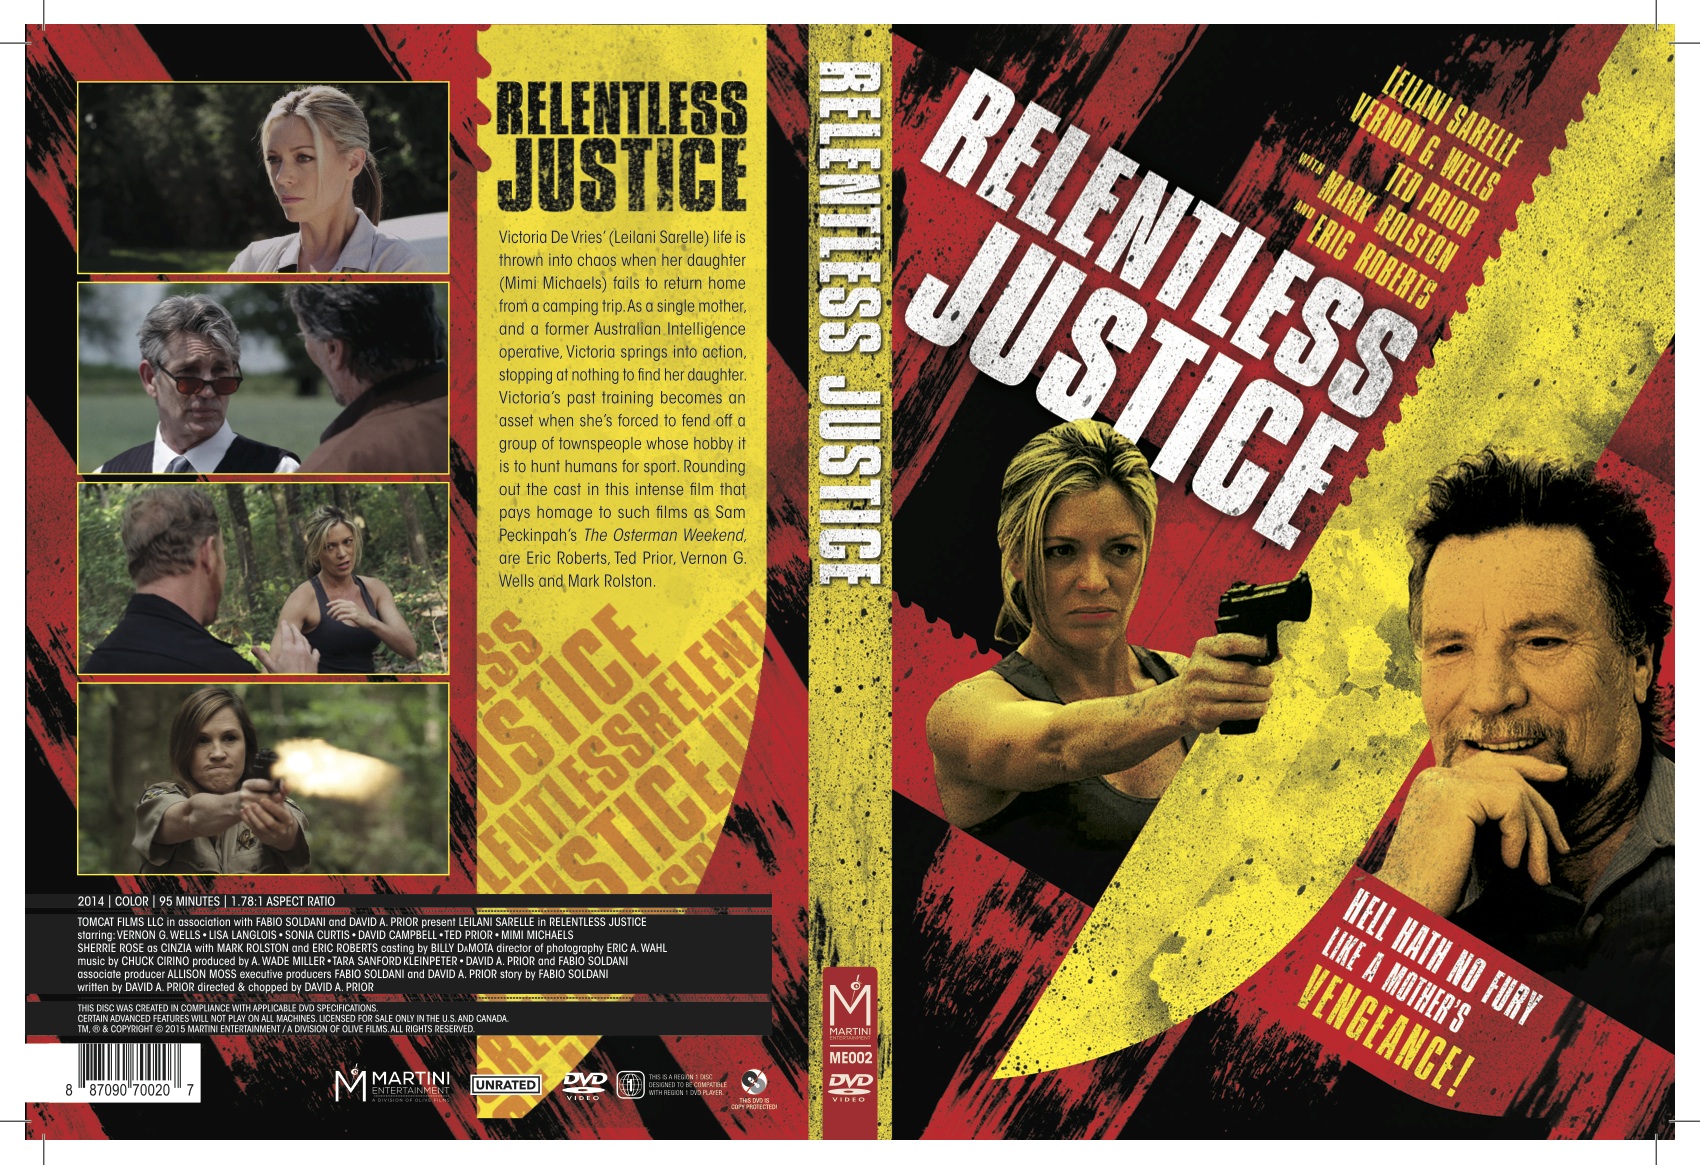 DVD Cover from 